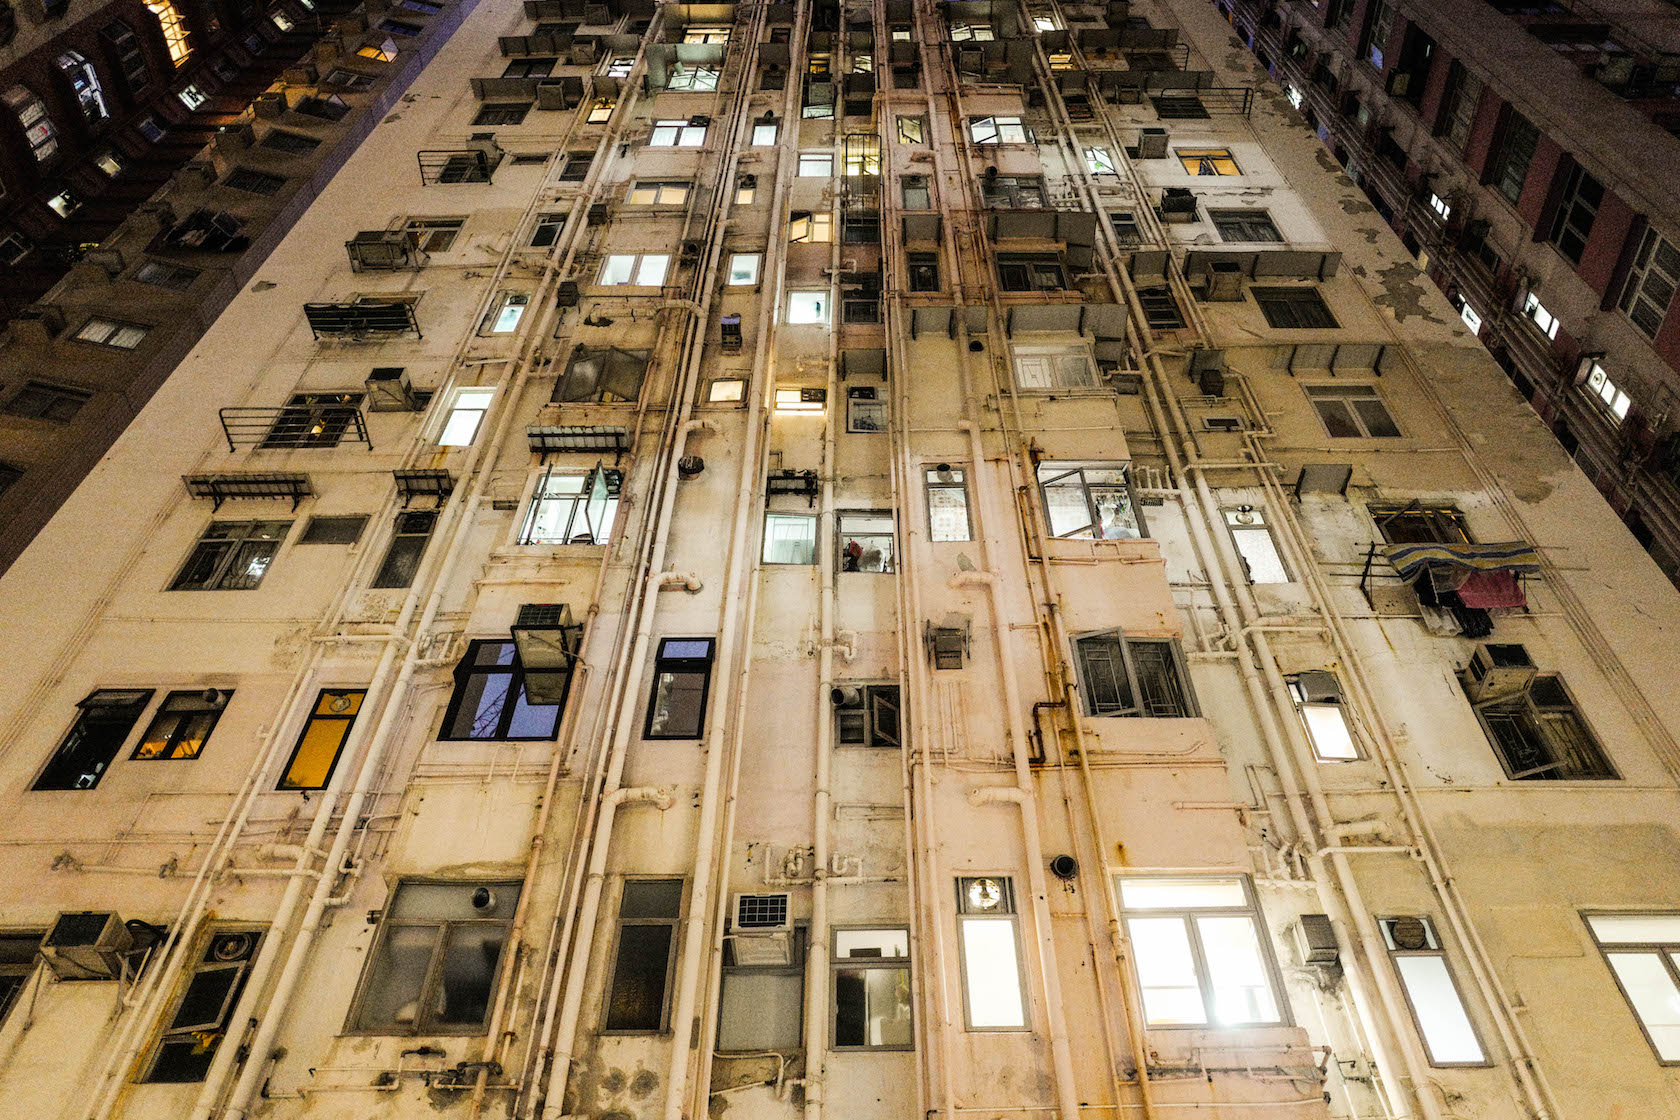 Hong Kong Lights Cityscape at night architecture rooftop urbex